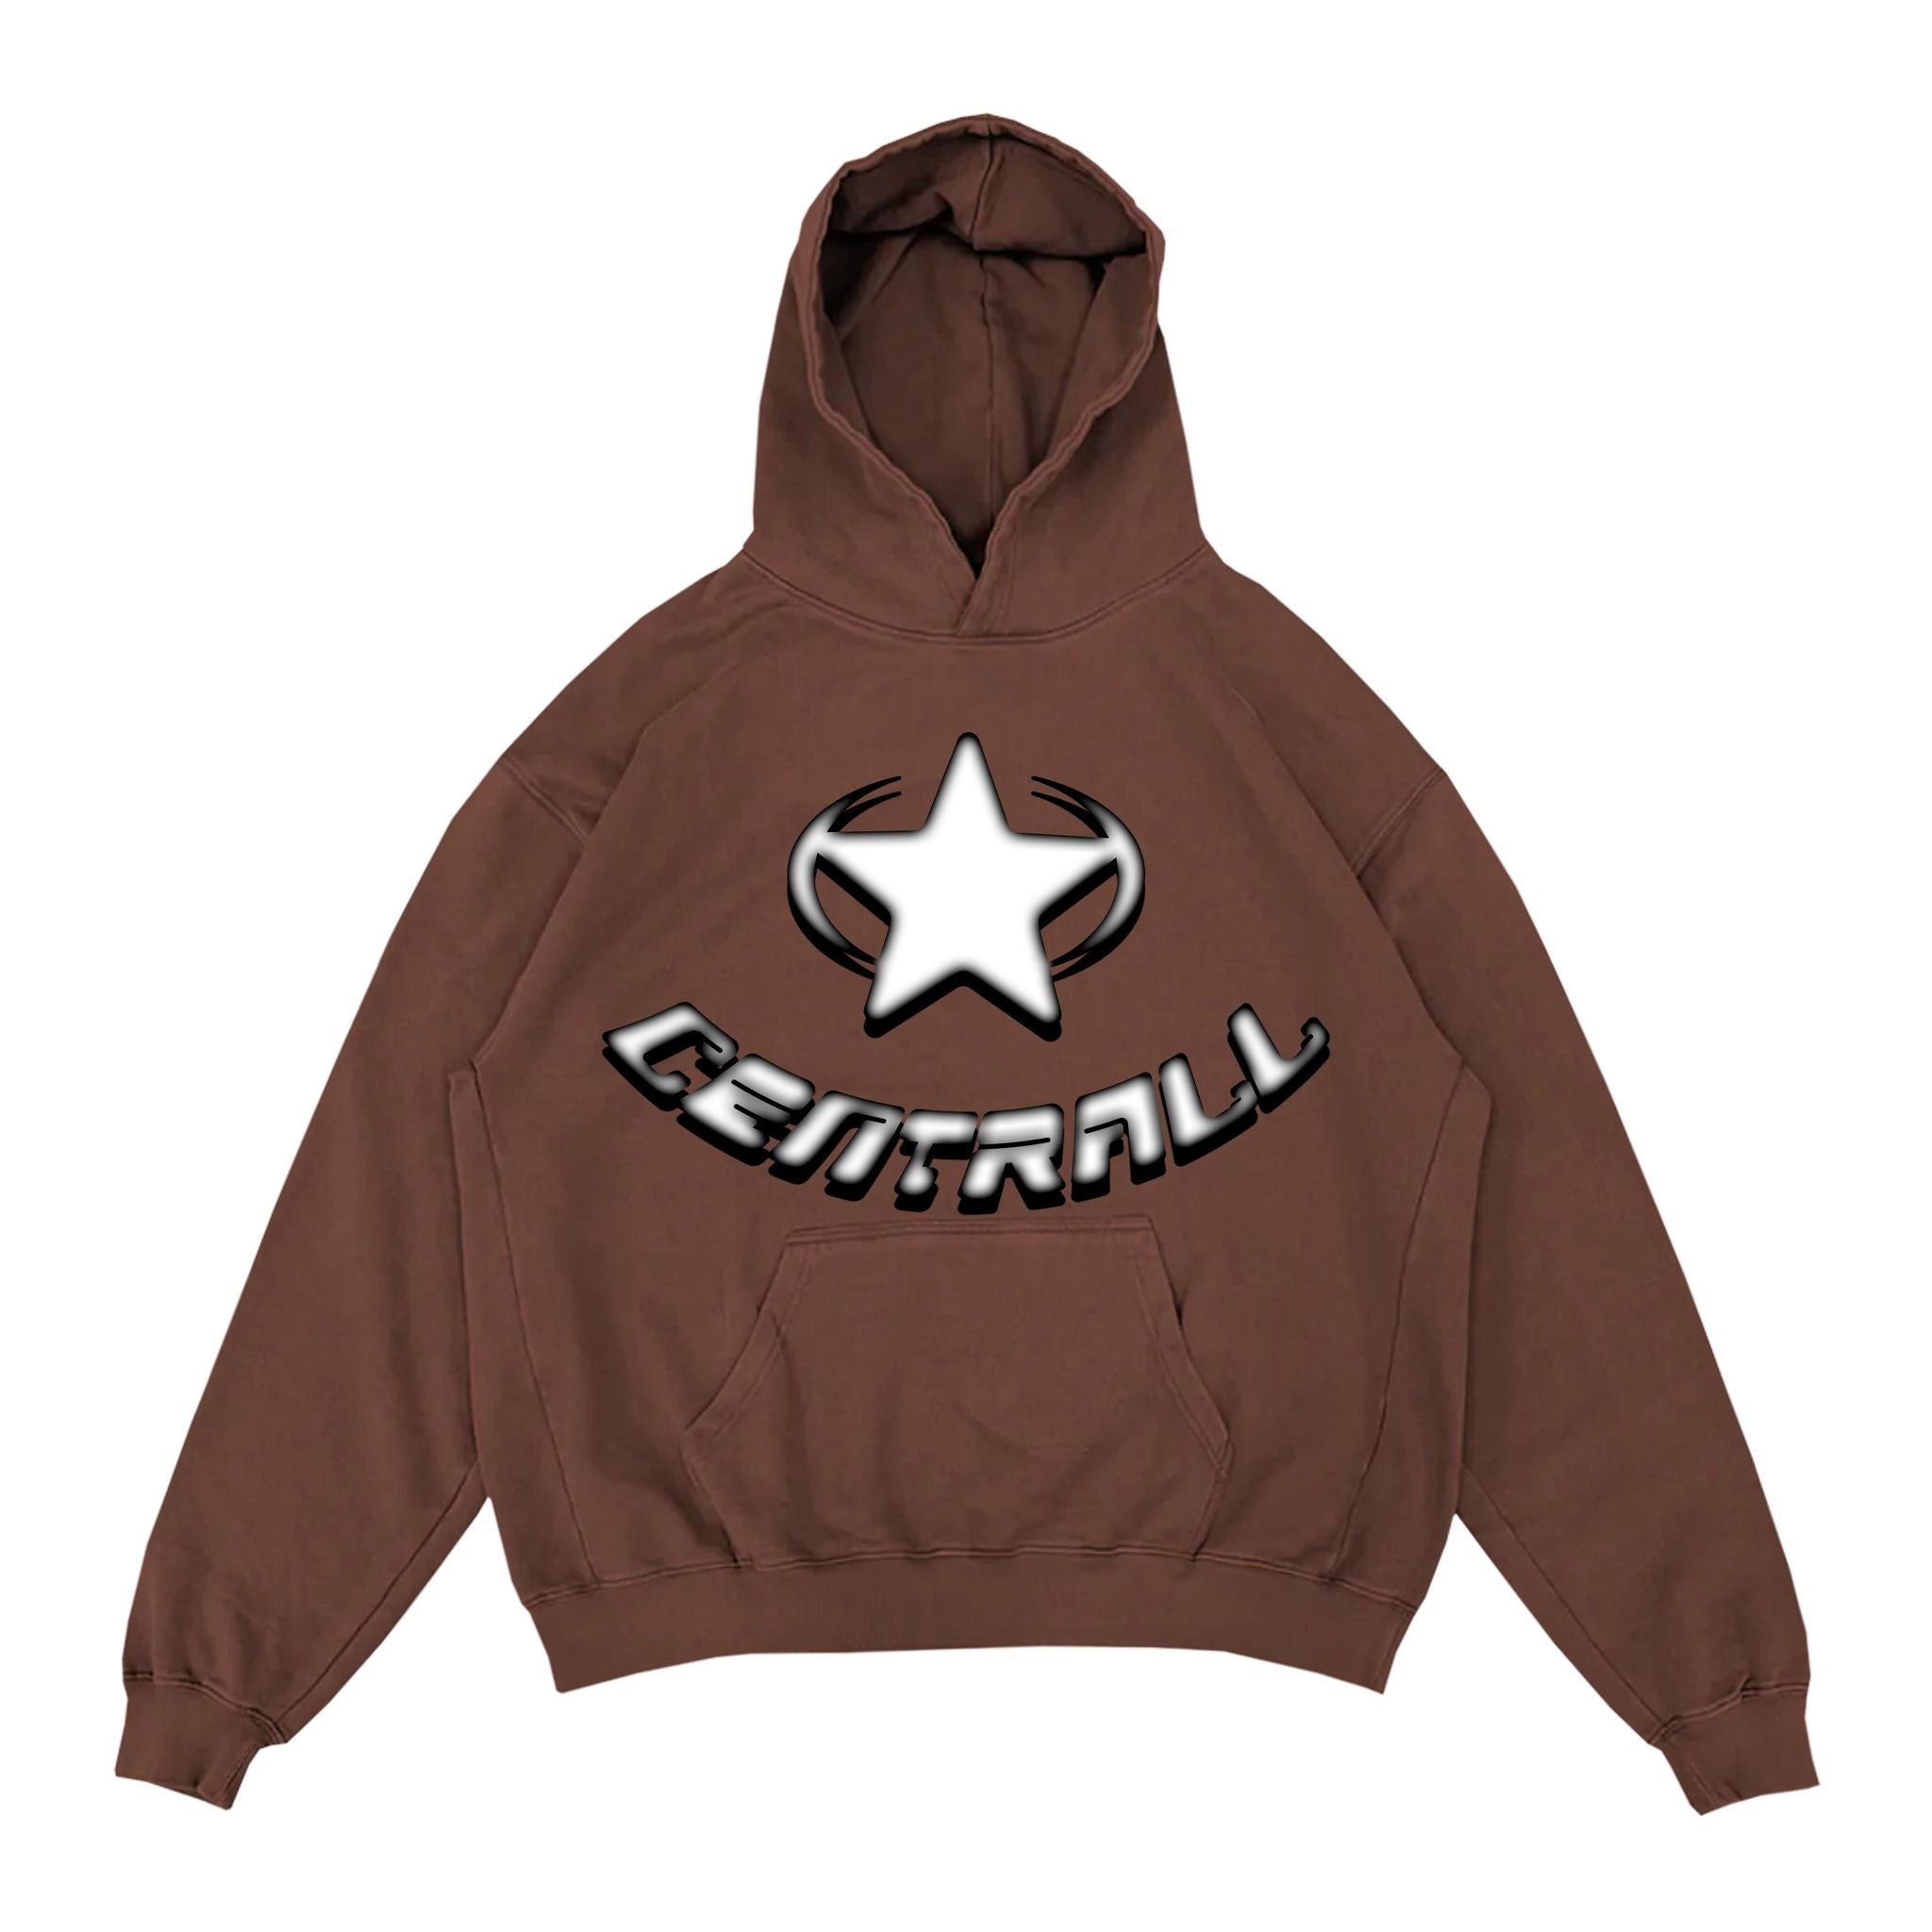 Centrall Brand – Centrall Online